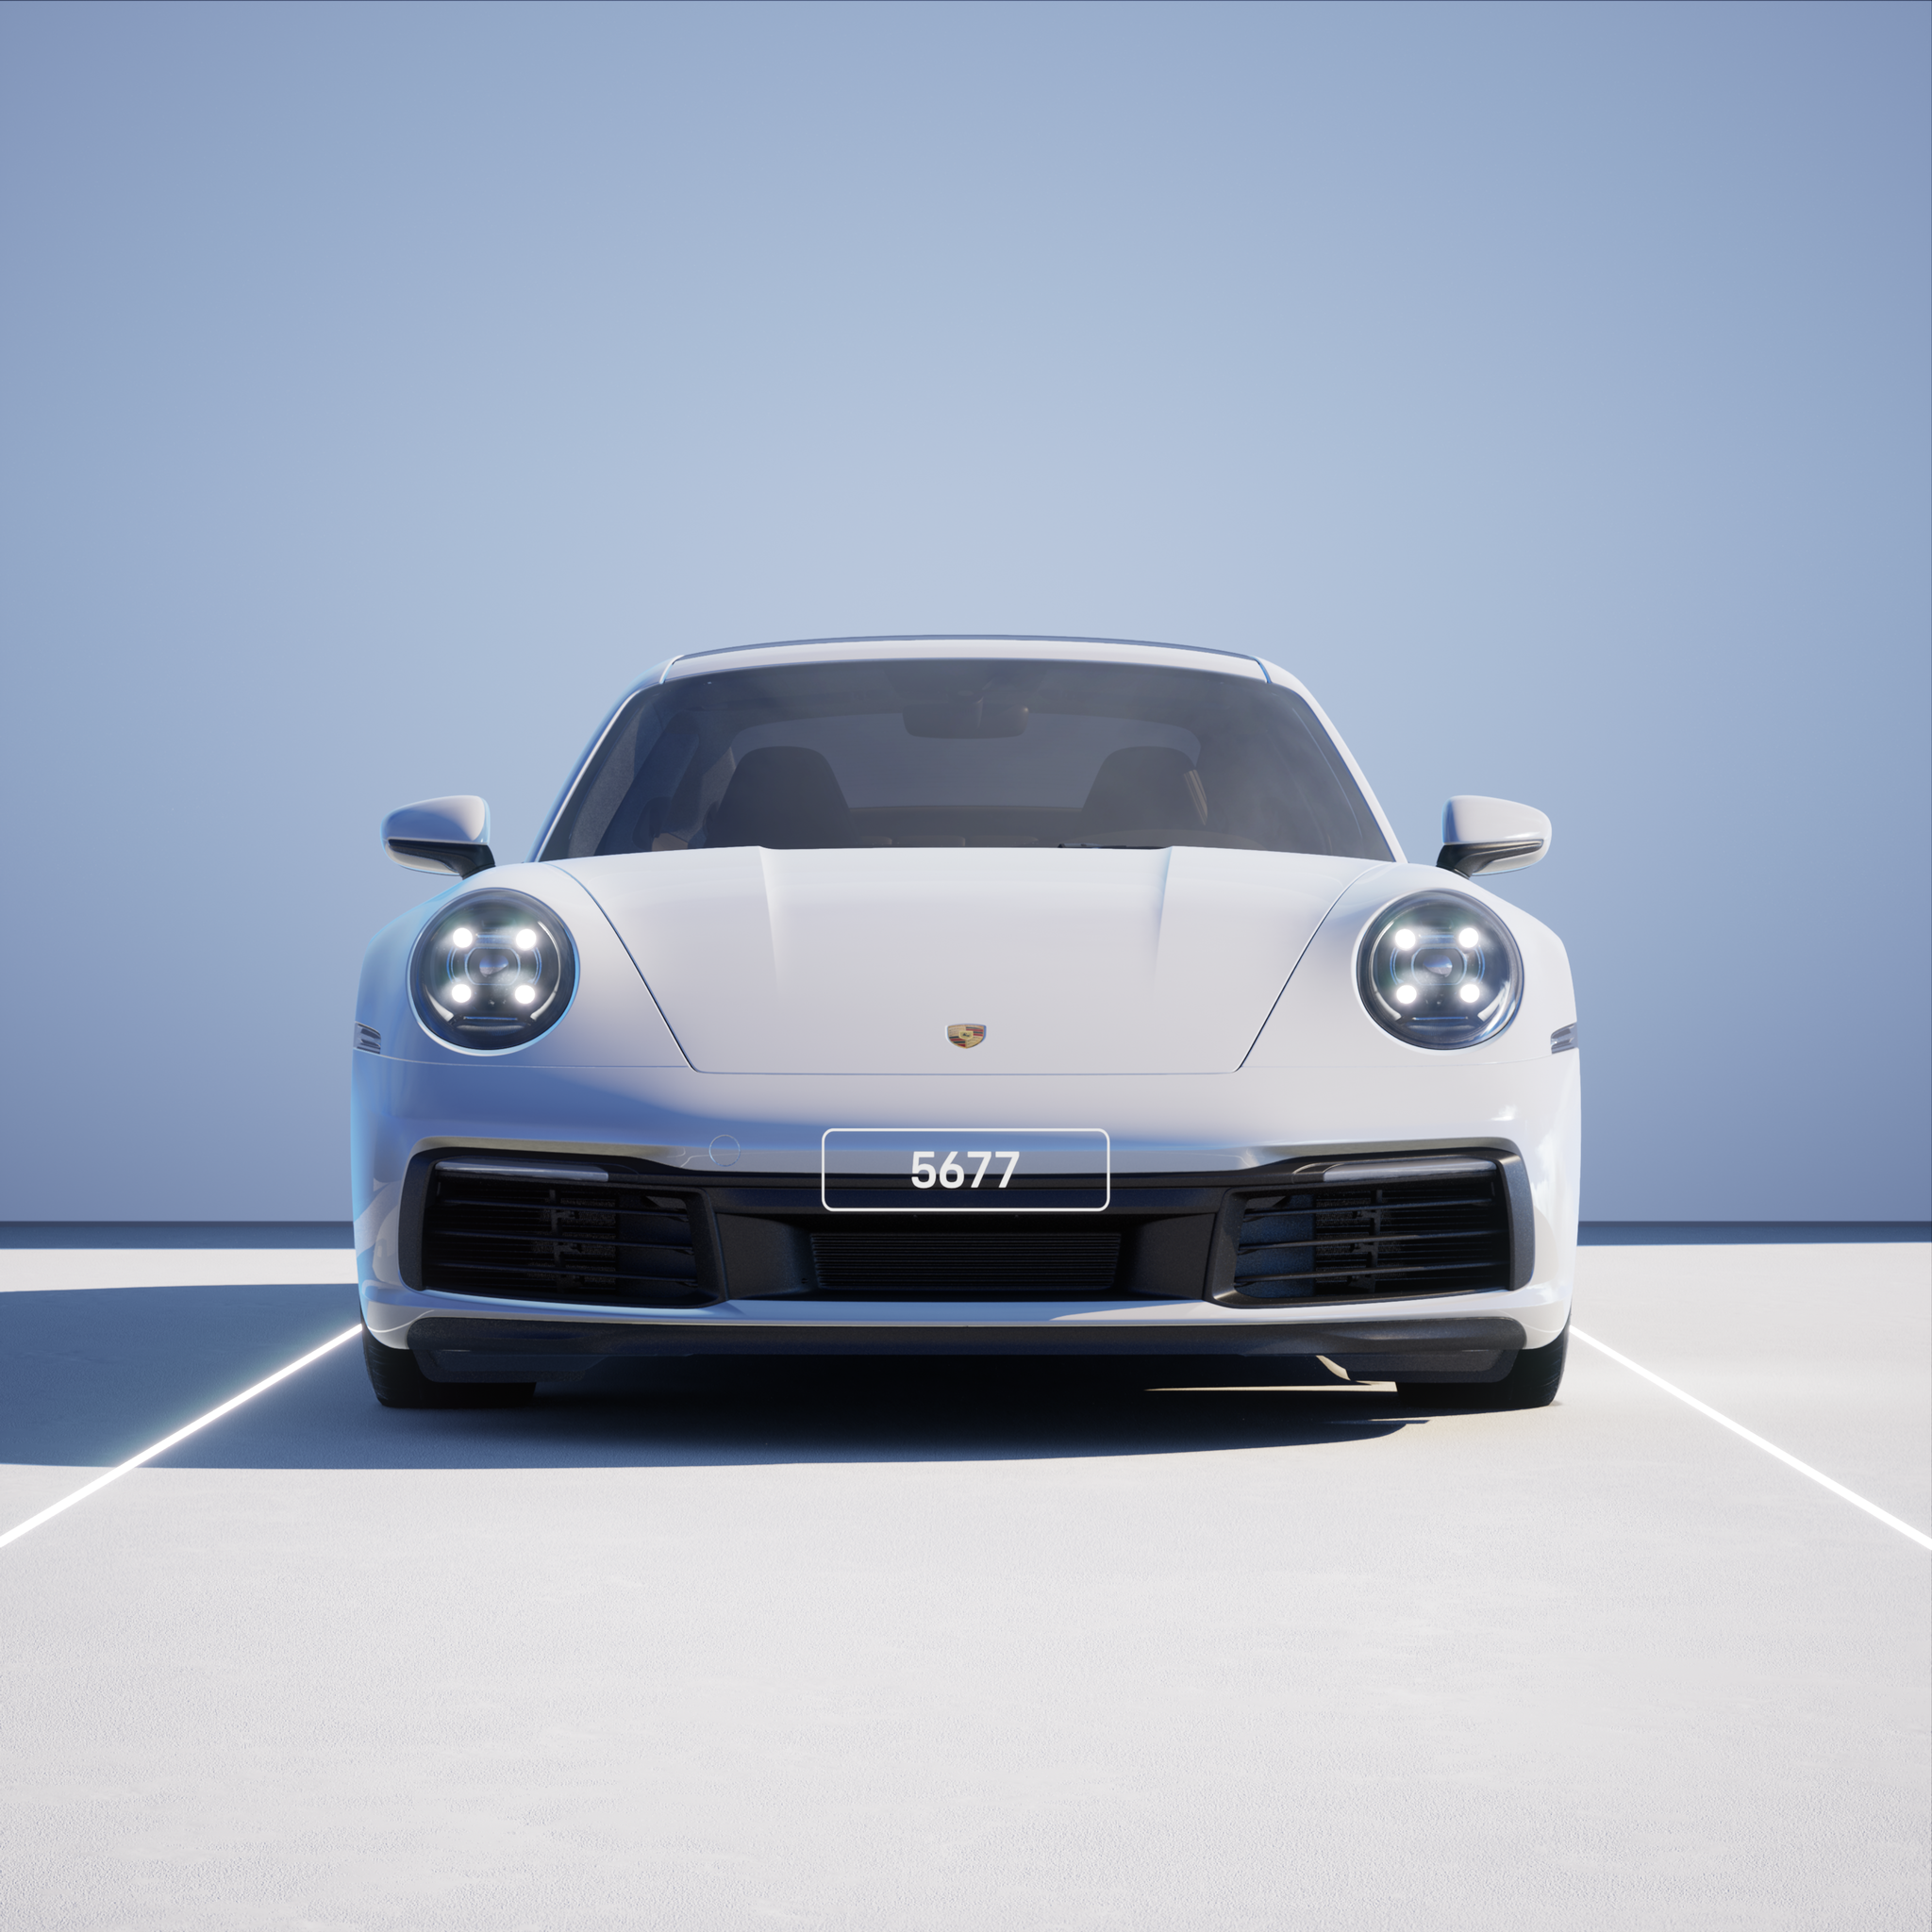 The PORSCHΞ 911 5677 image in phase